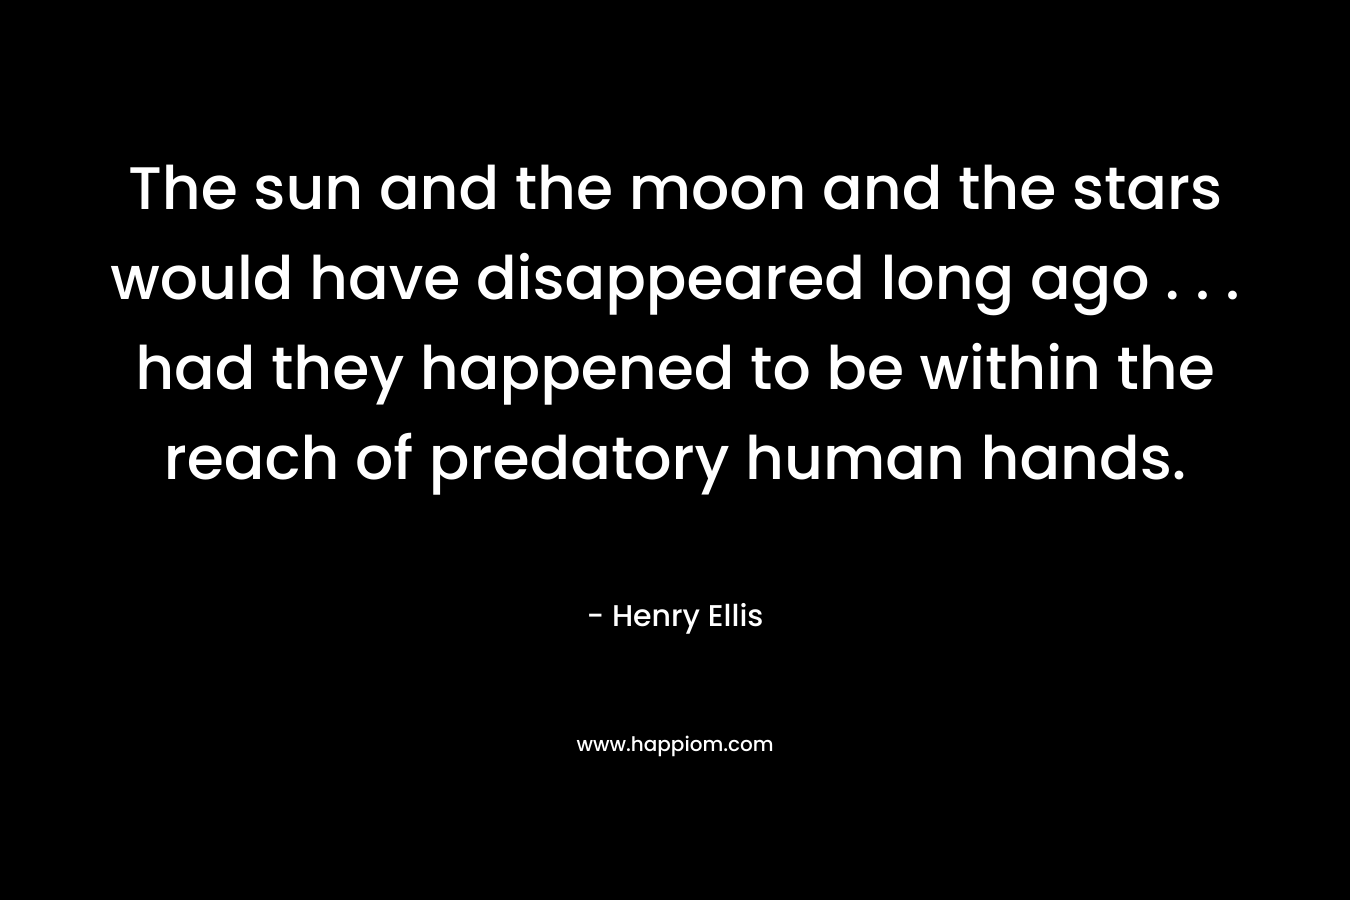 The sun and the moon and the stars would have disappeared long ago . . . had they happened to be within the reach of predatory human hands.